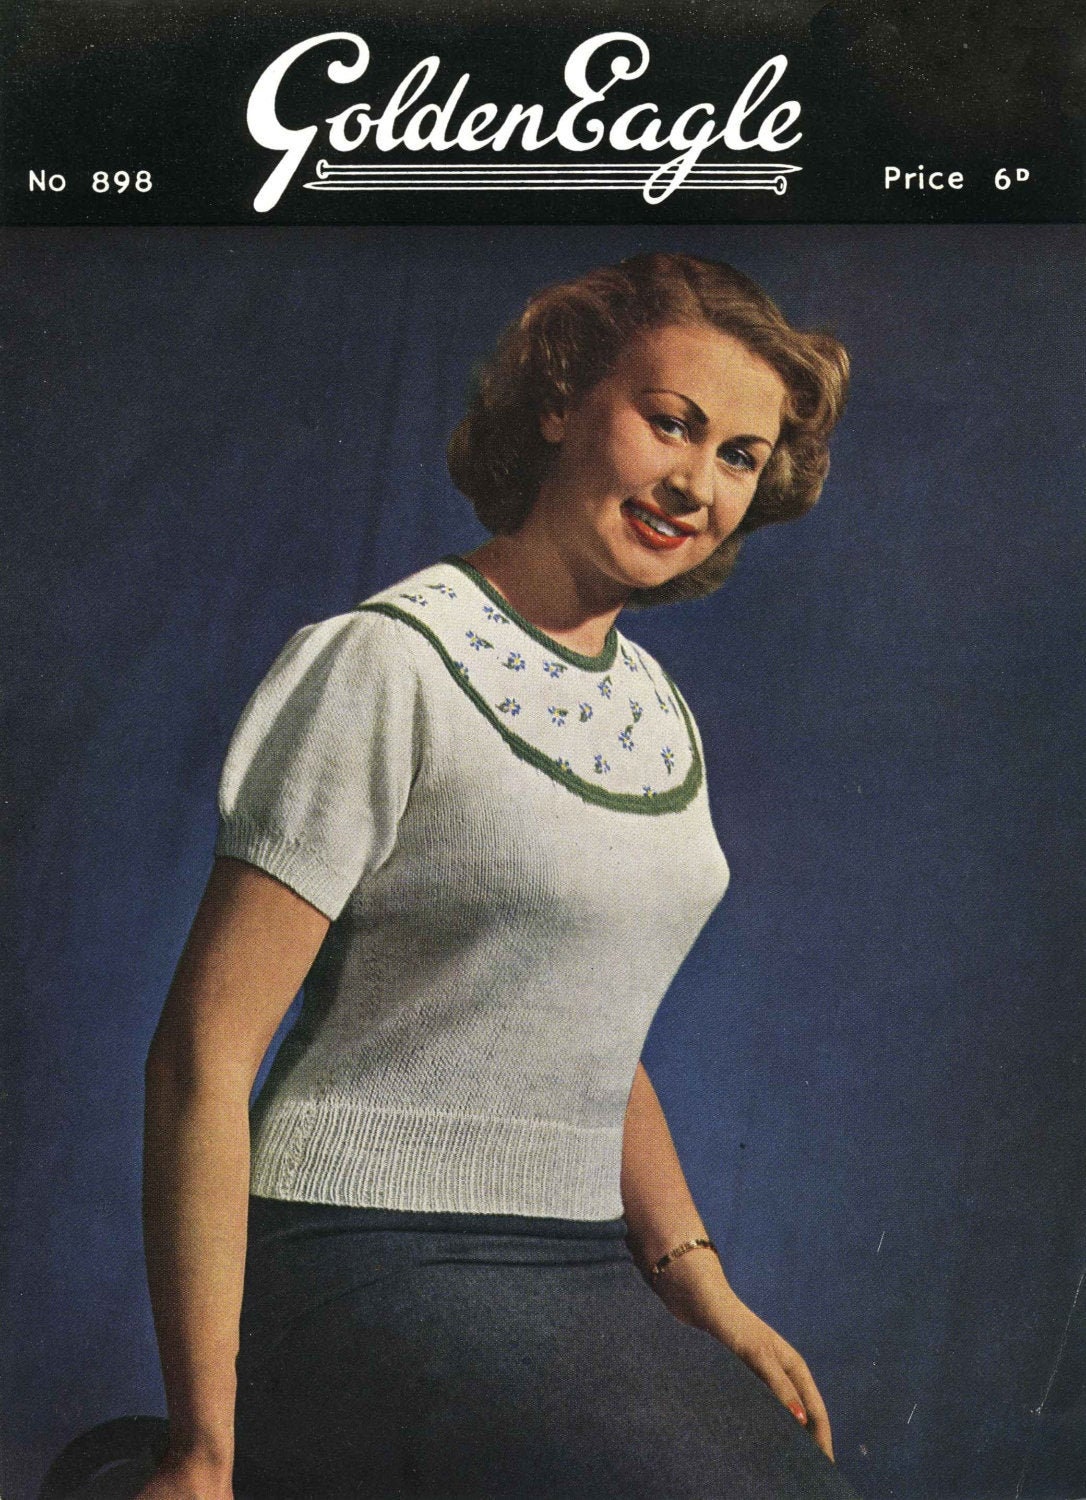 Ladies Jumper with Floral Yoke, 34" Bust, 3ply, 50s Knitting Pattern, Golden Eagle 898